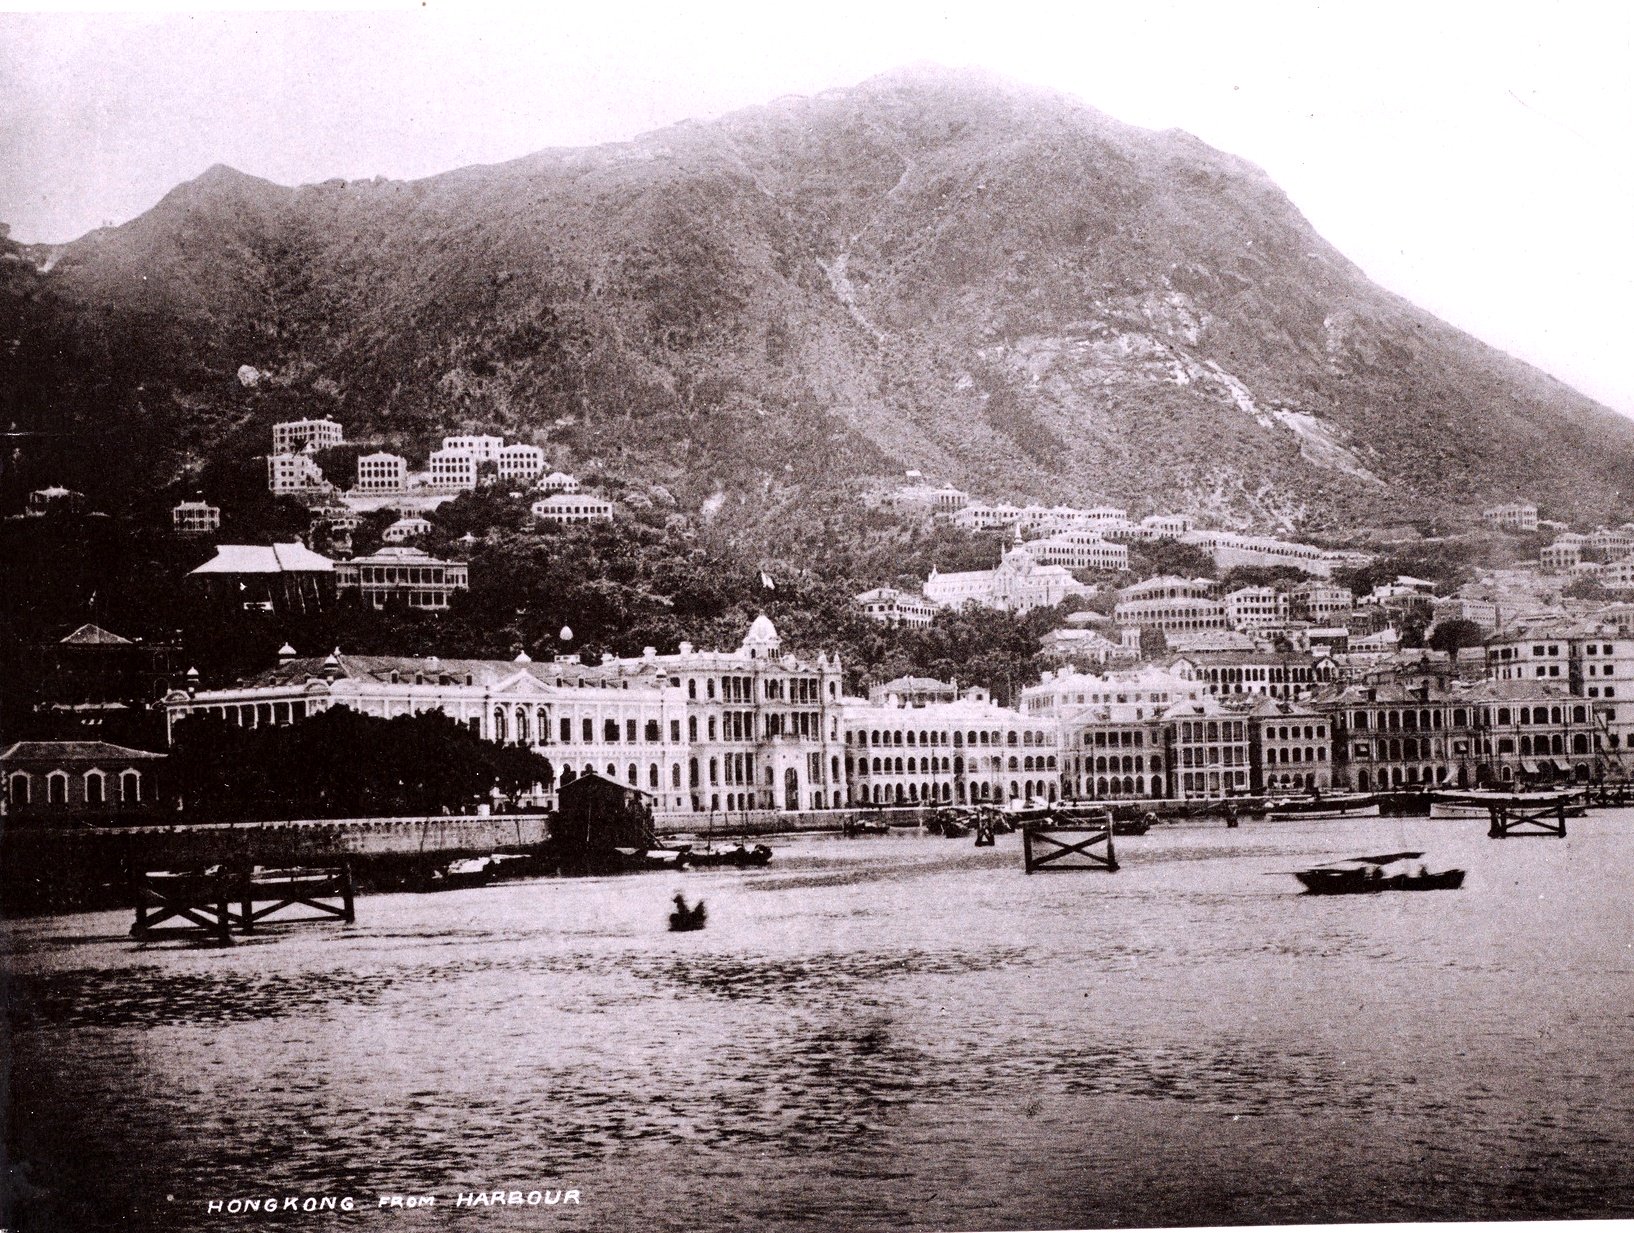 Hong Kong Harbour, 1889. (Digital image courtesy of the Getty’s Open Content Program)